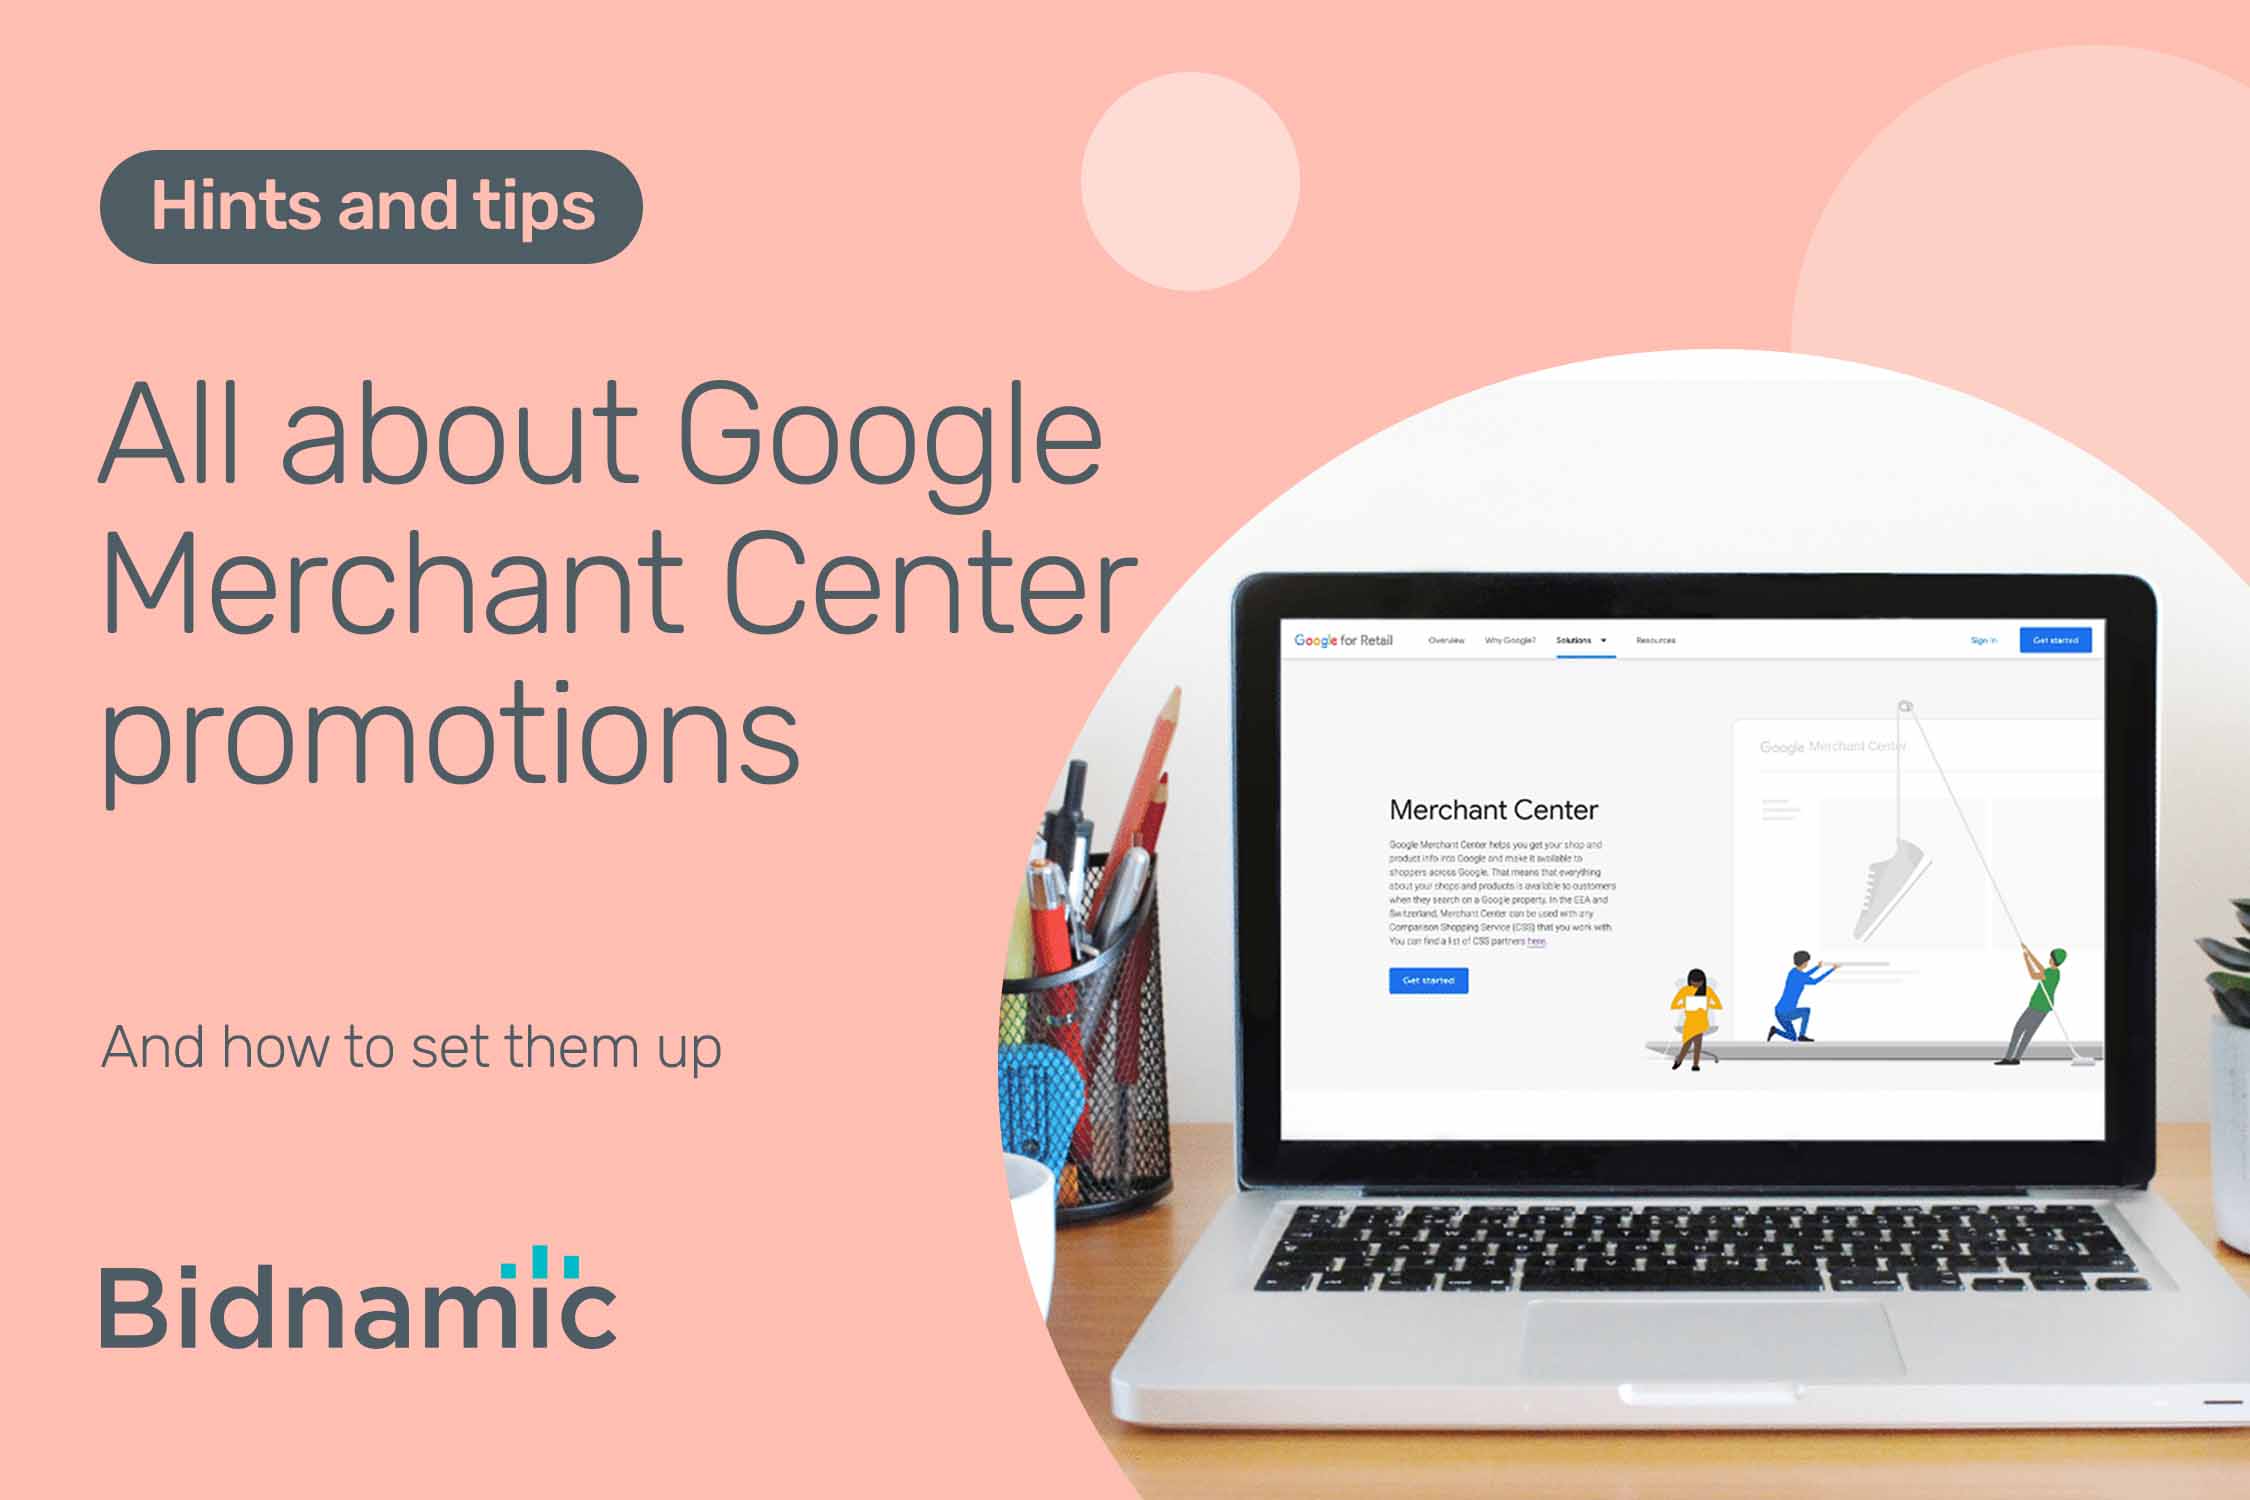 All about Google Merchant Center promotions and how to set them up